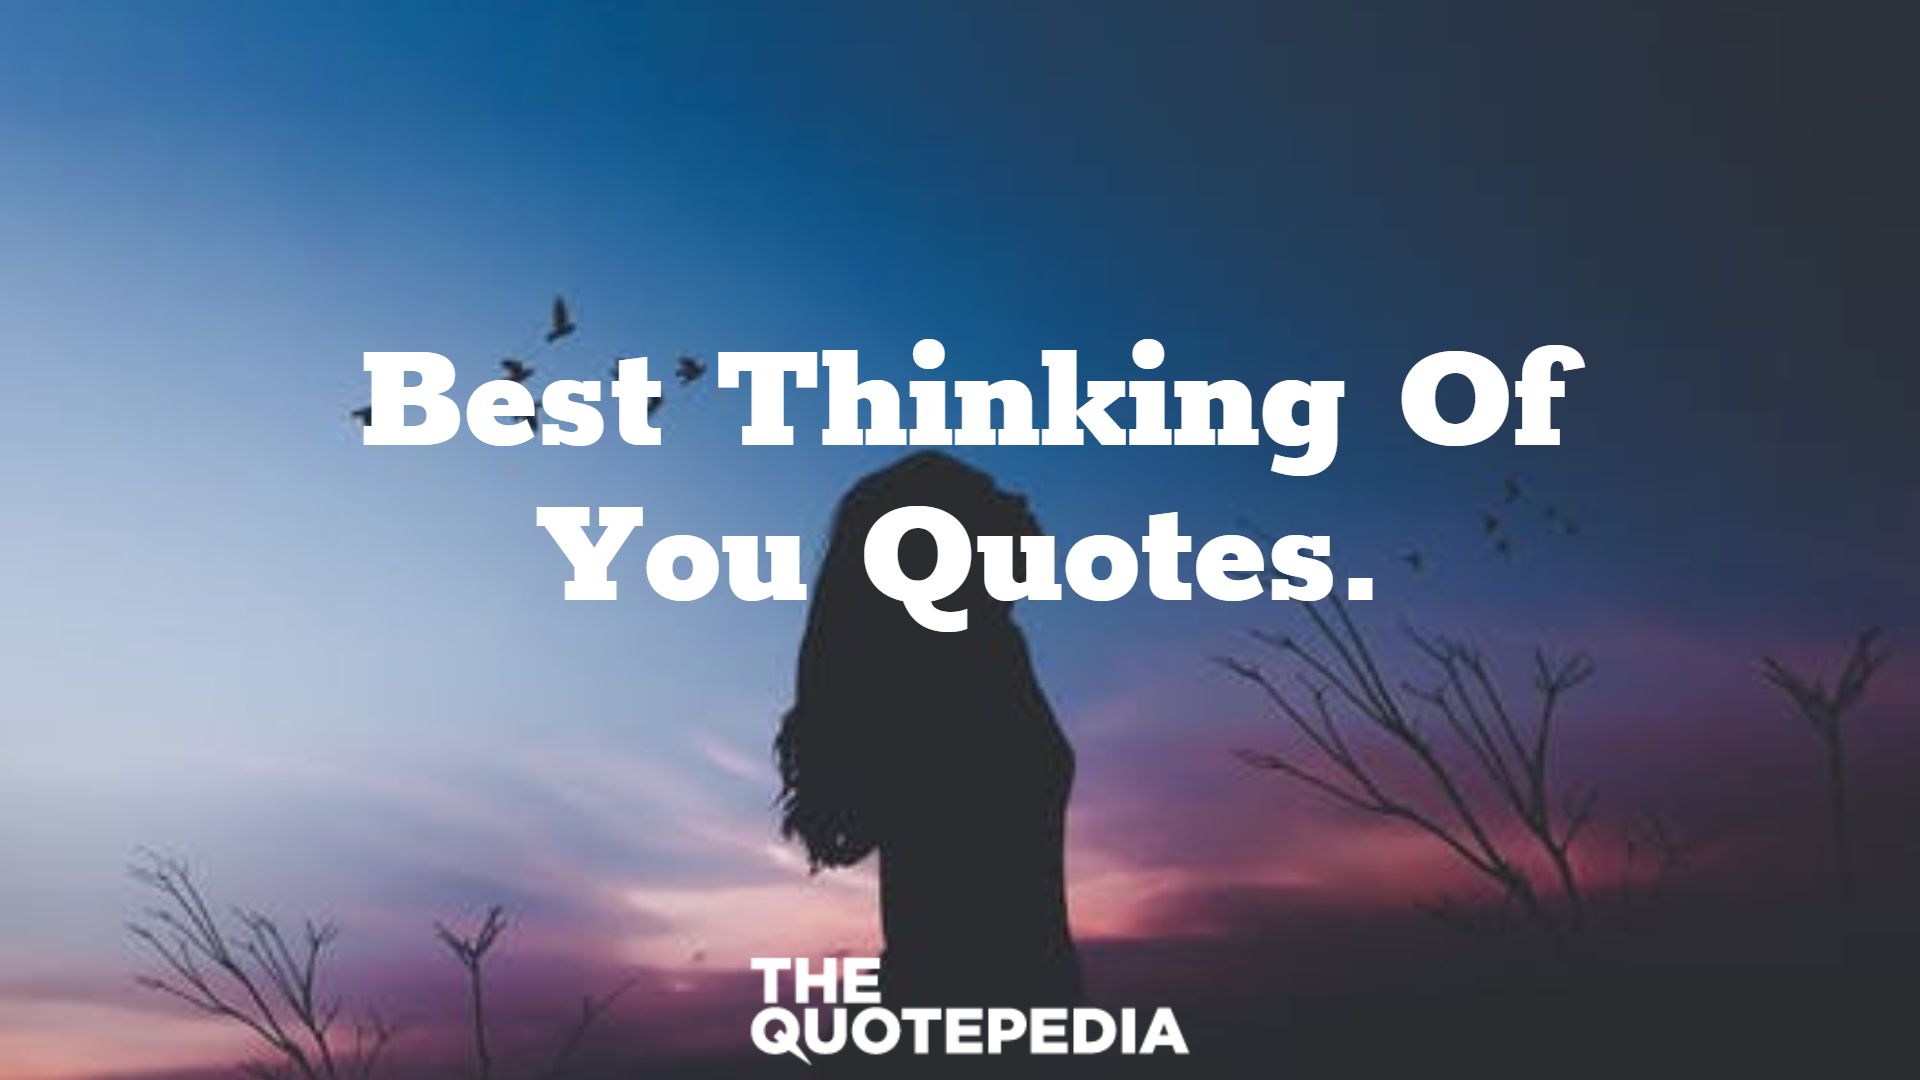 Best Thinking Of You Quotes